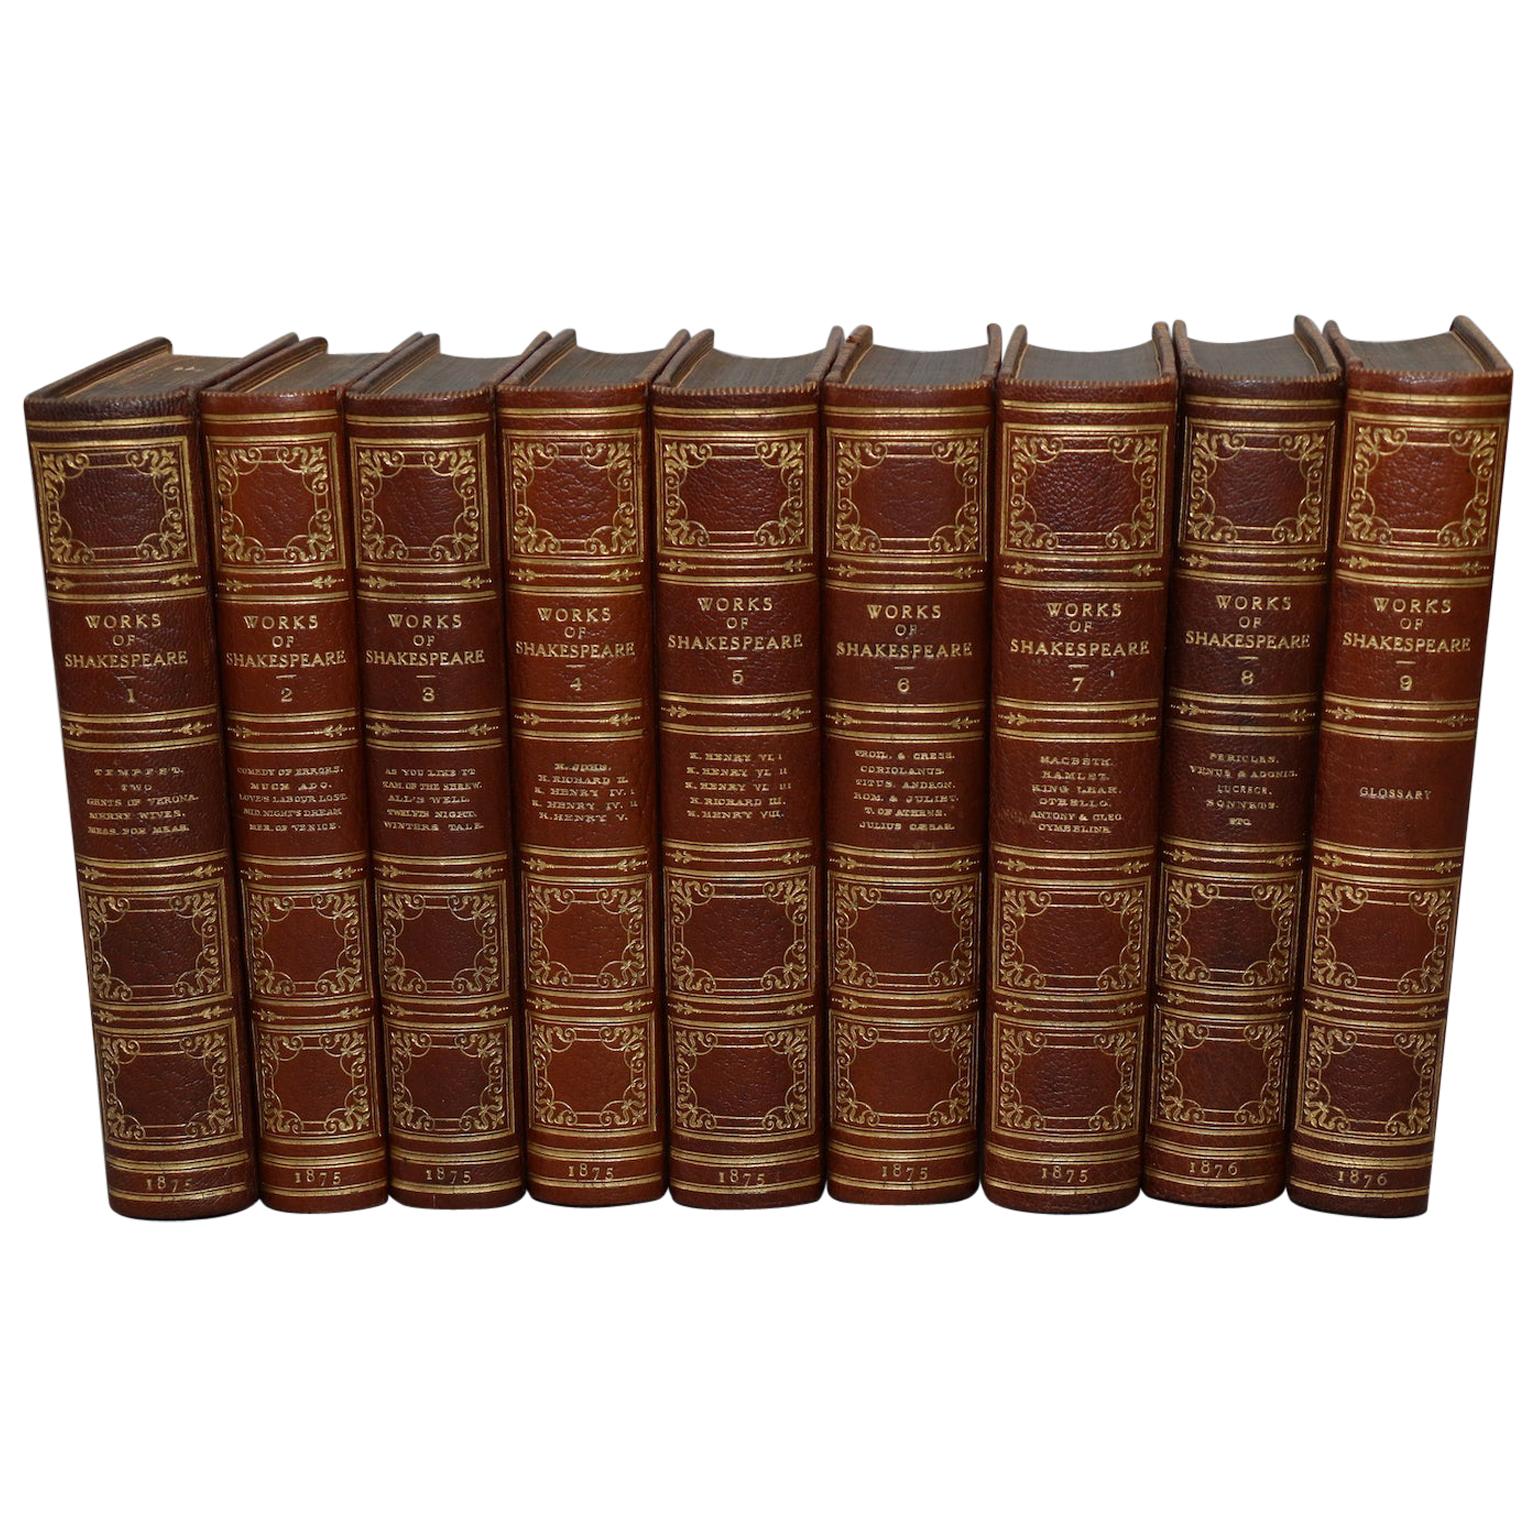 Books, The Works of William Shakespeare, Text revised by the Rev. Alexander Dyce